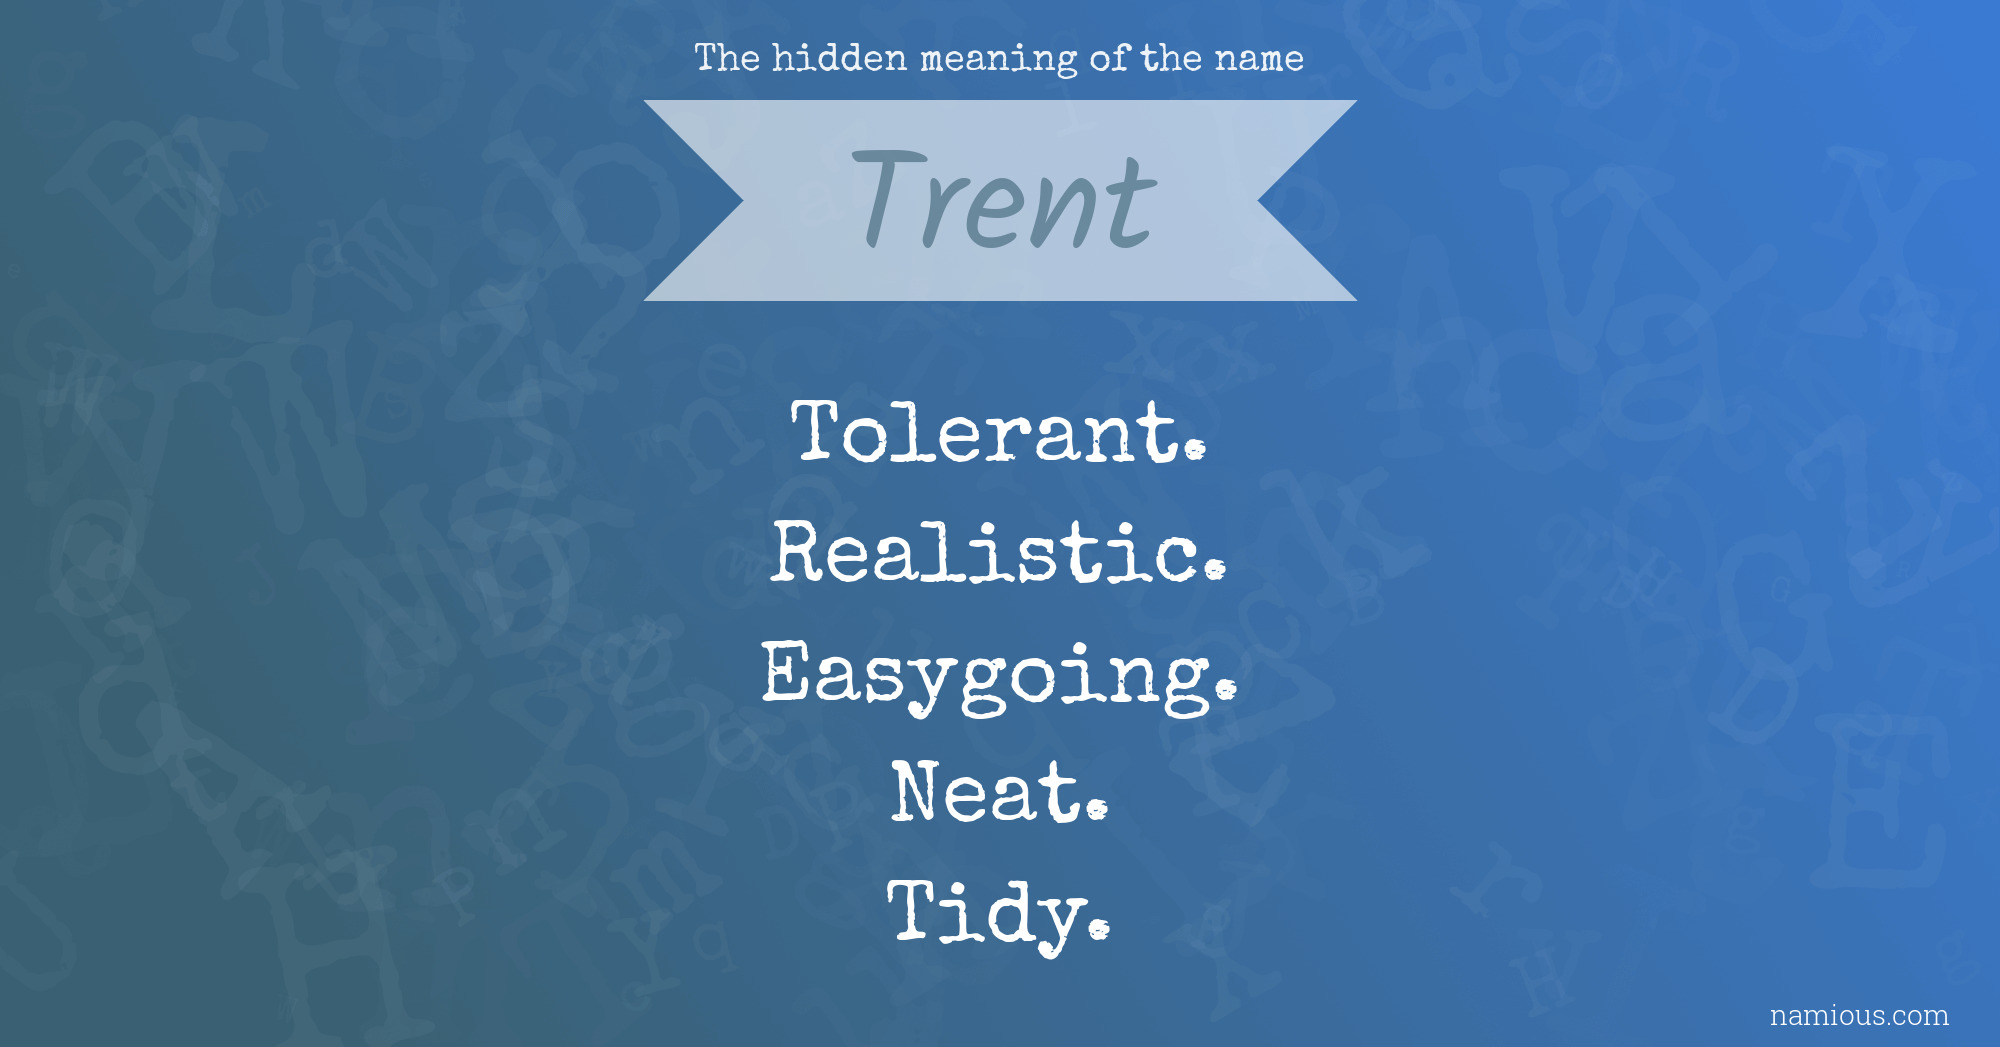 What is the meaning of trent?